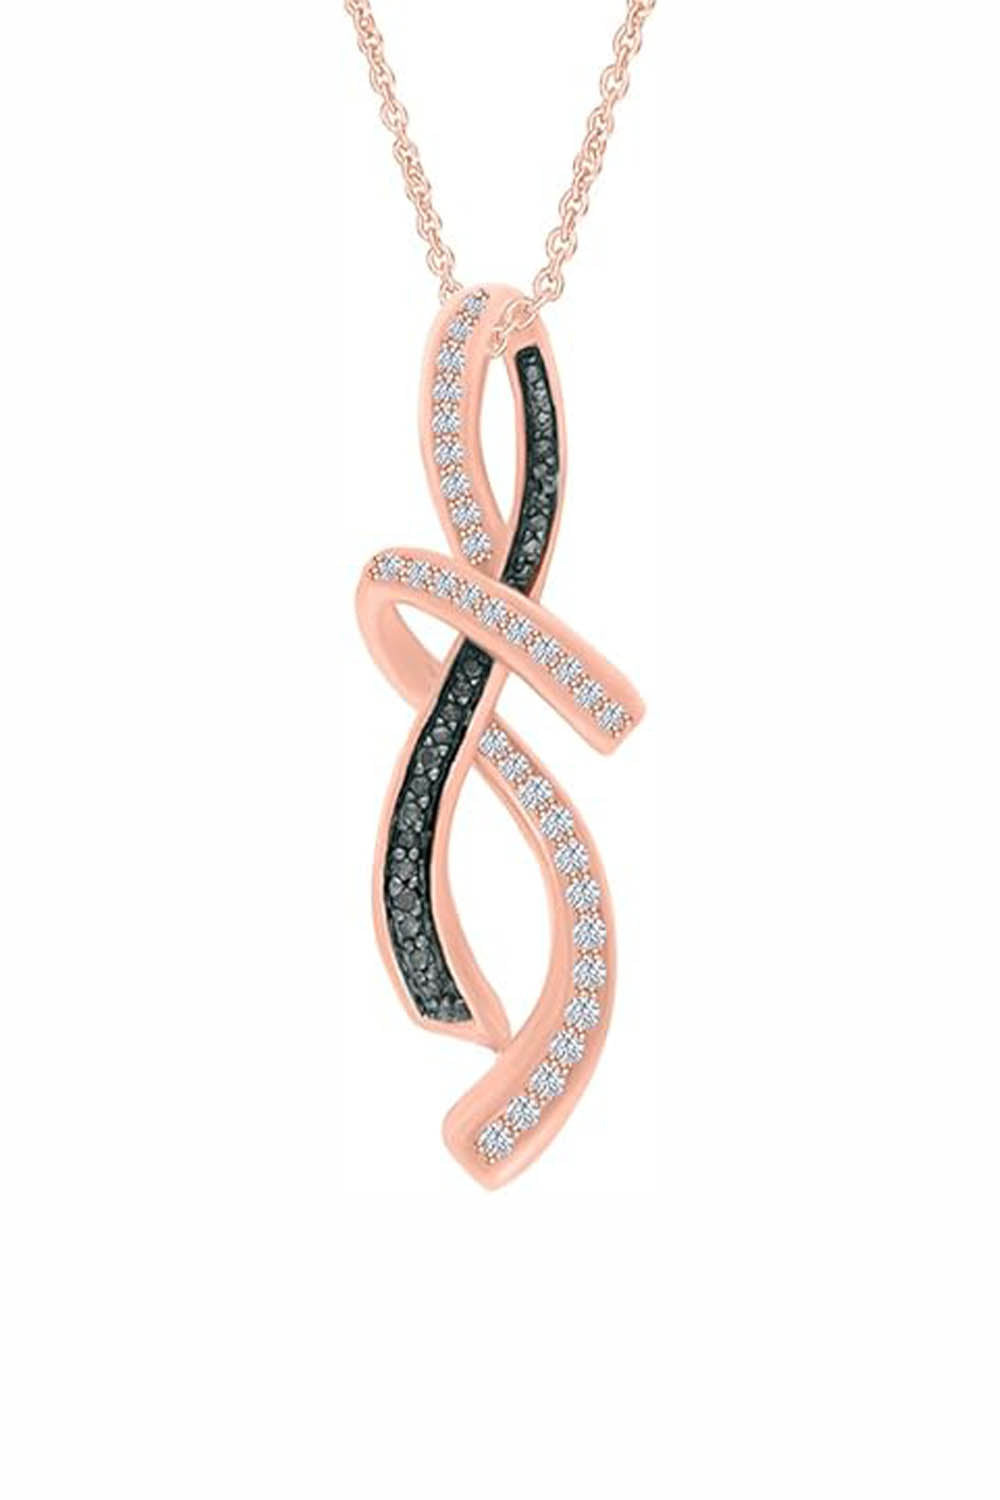 Rose Gold Color Yaathi Black and White Infinity Pendant Necklace 